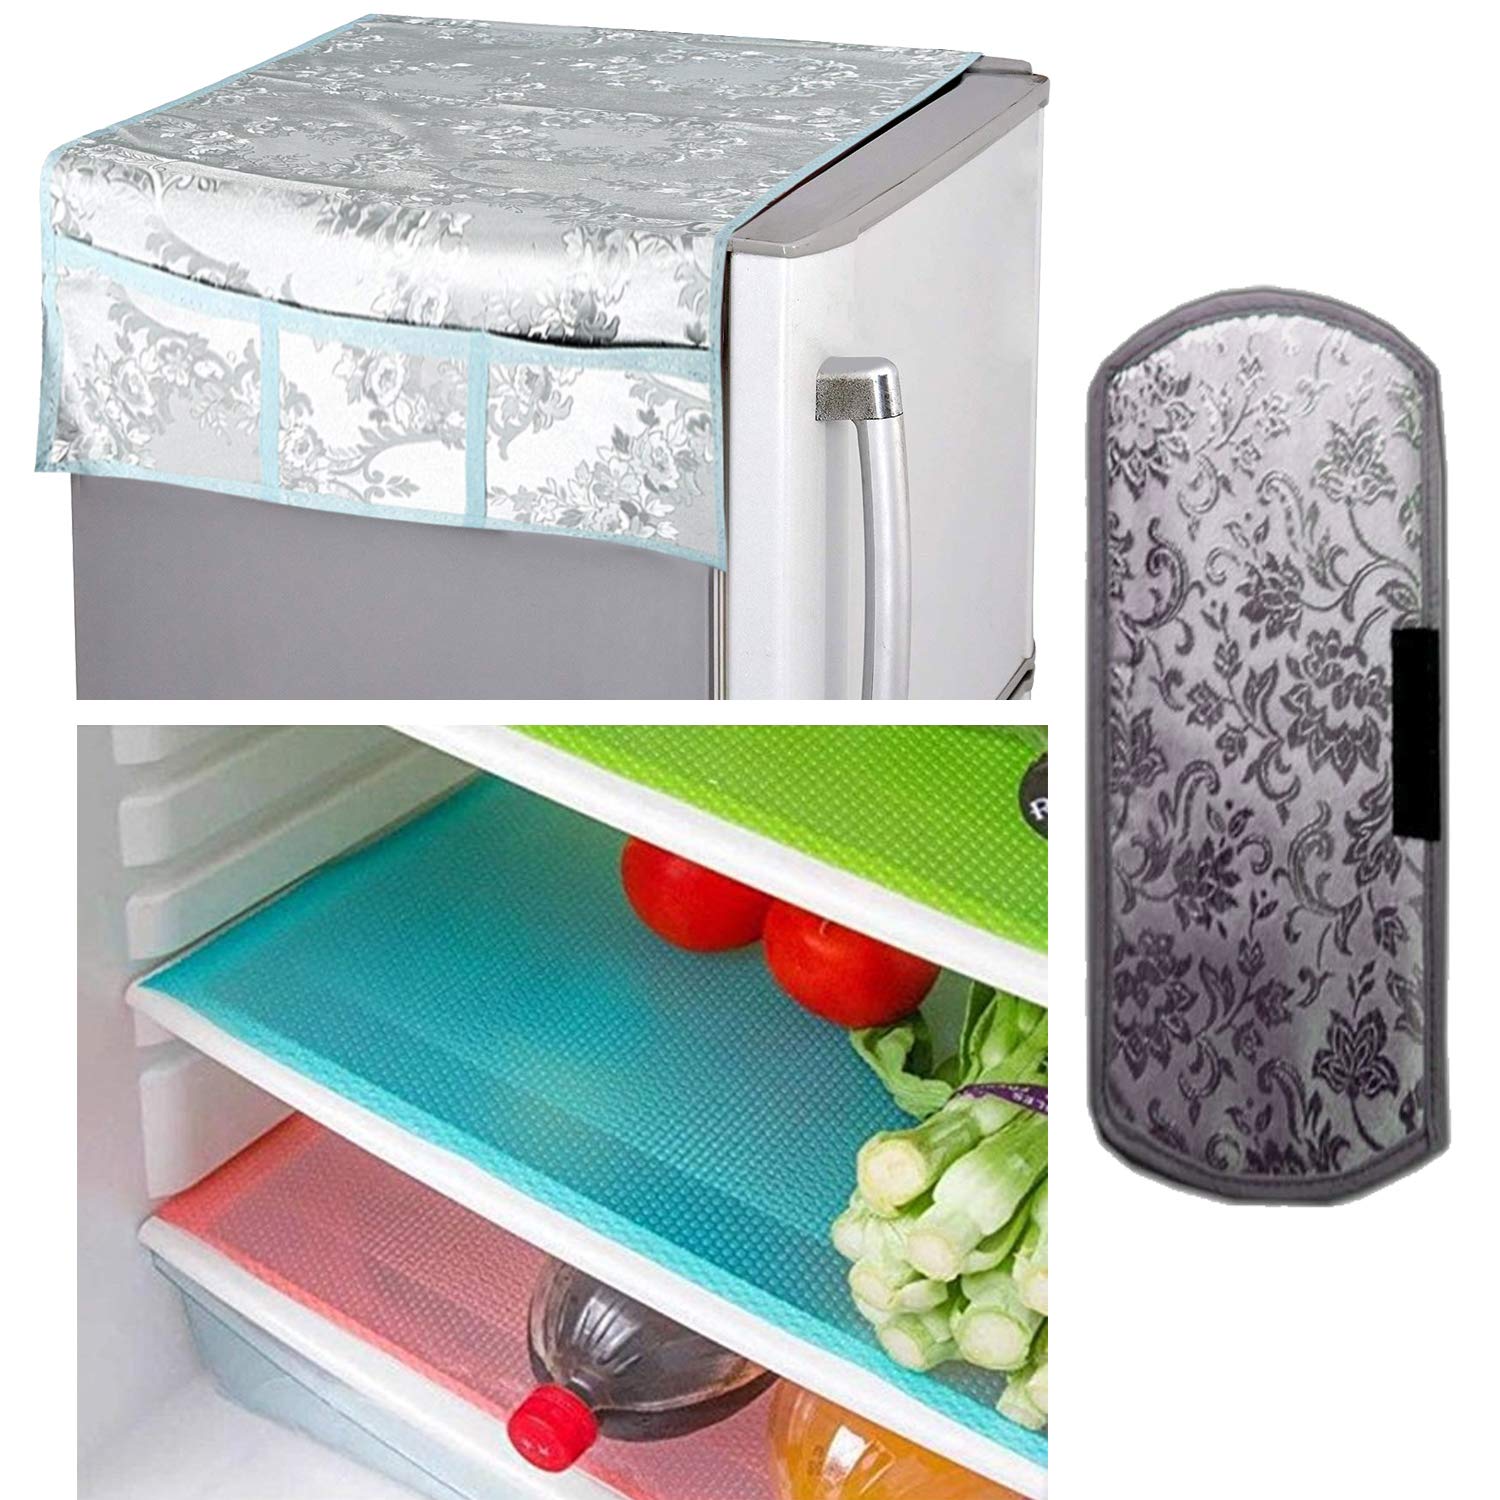 1pc Fruit Pattern Microwave Oven Cover, Modern Microwave Oven Dust Cover,  For Home